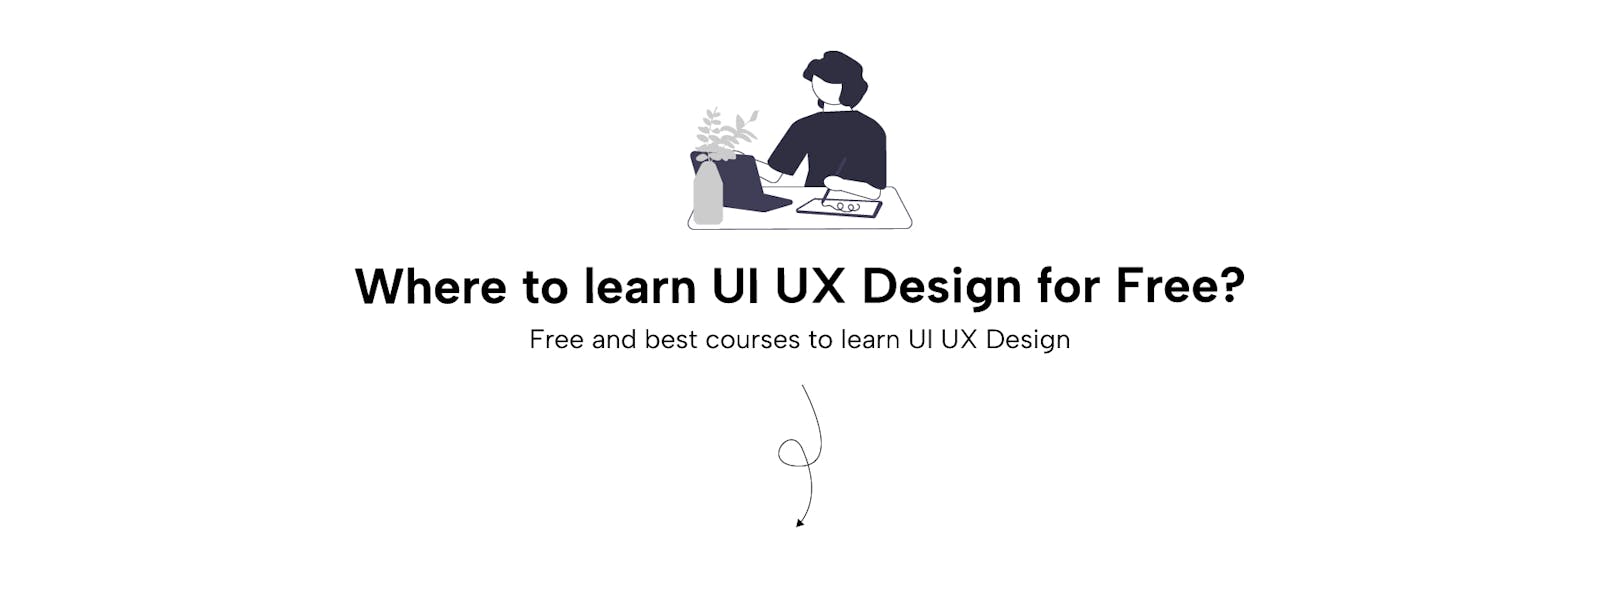 7 Free Courses to learn UI UX Design